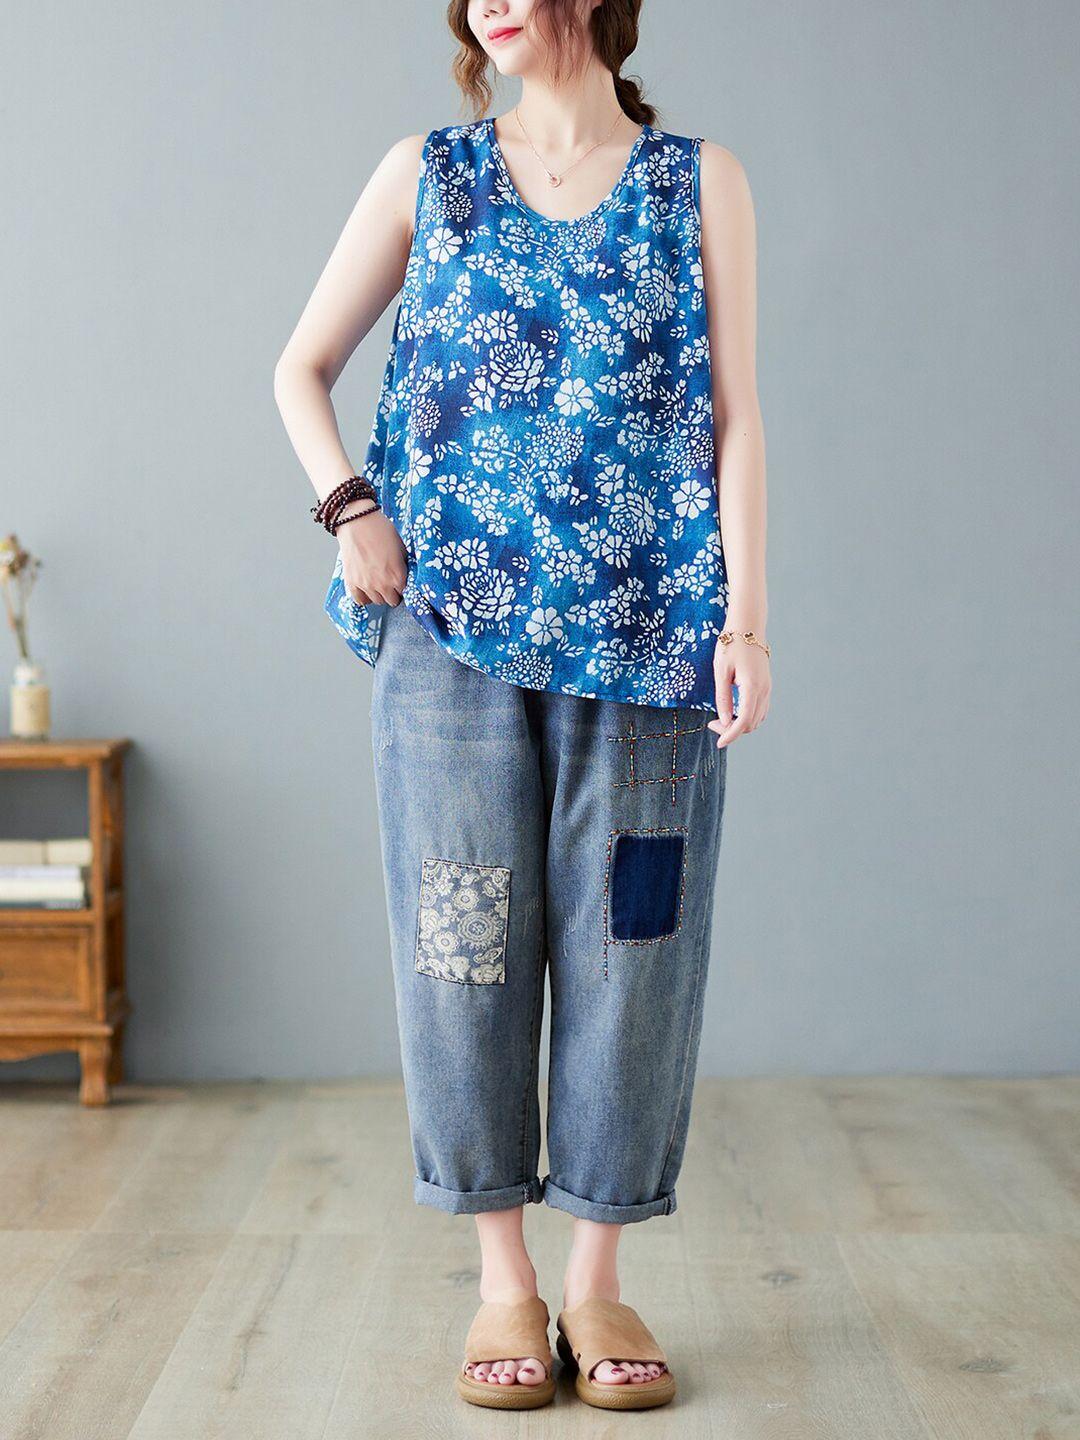 jc mode floral printed sleeveless a-line top